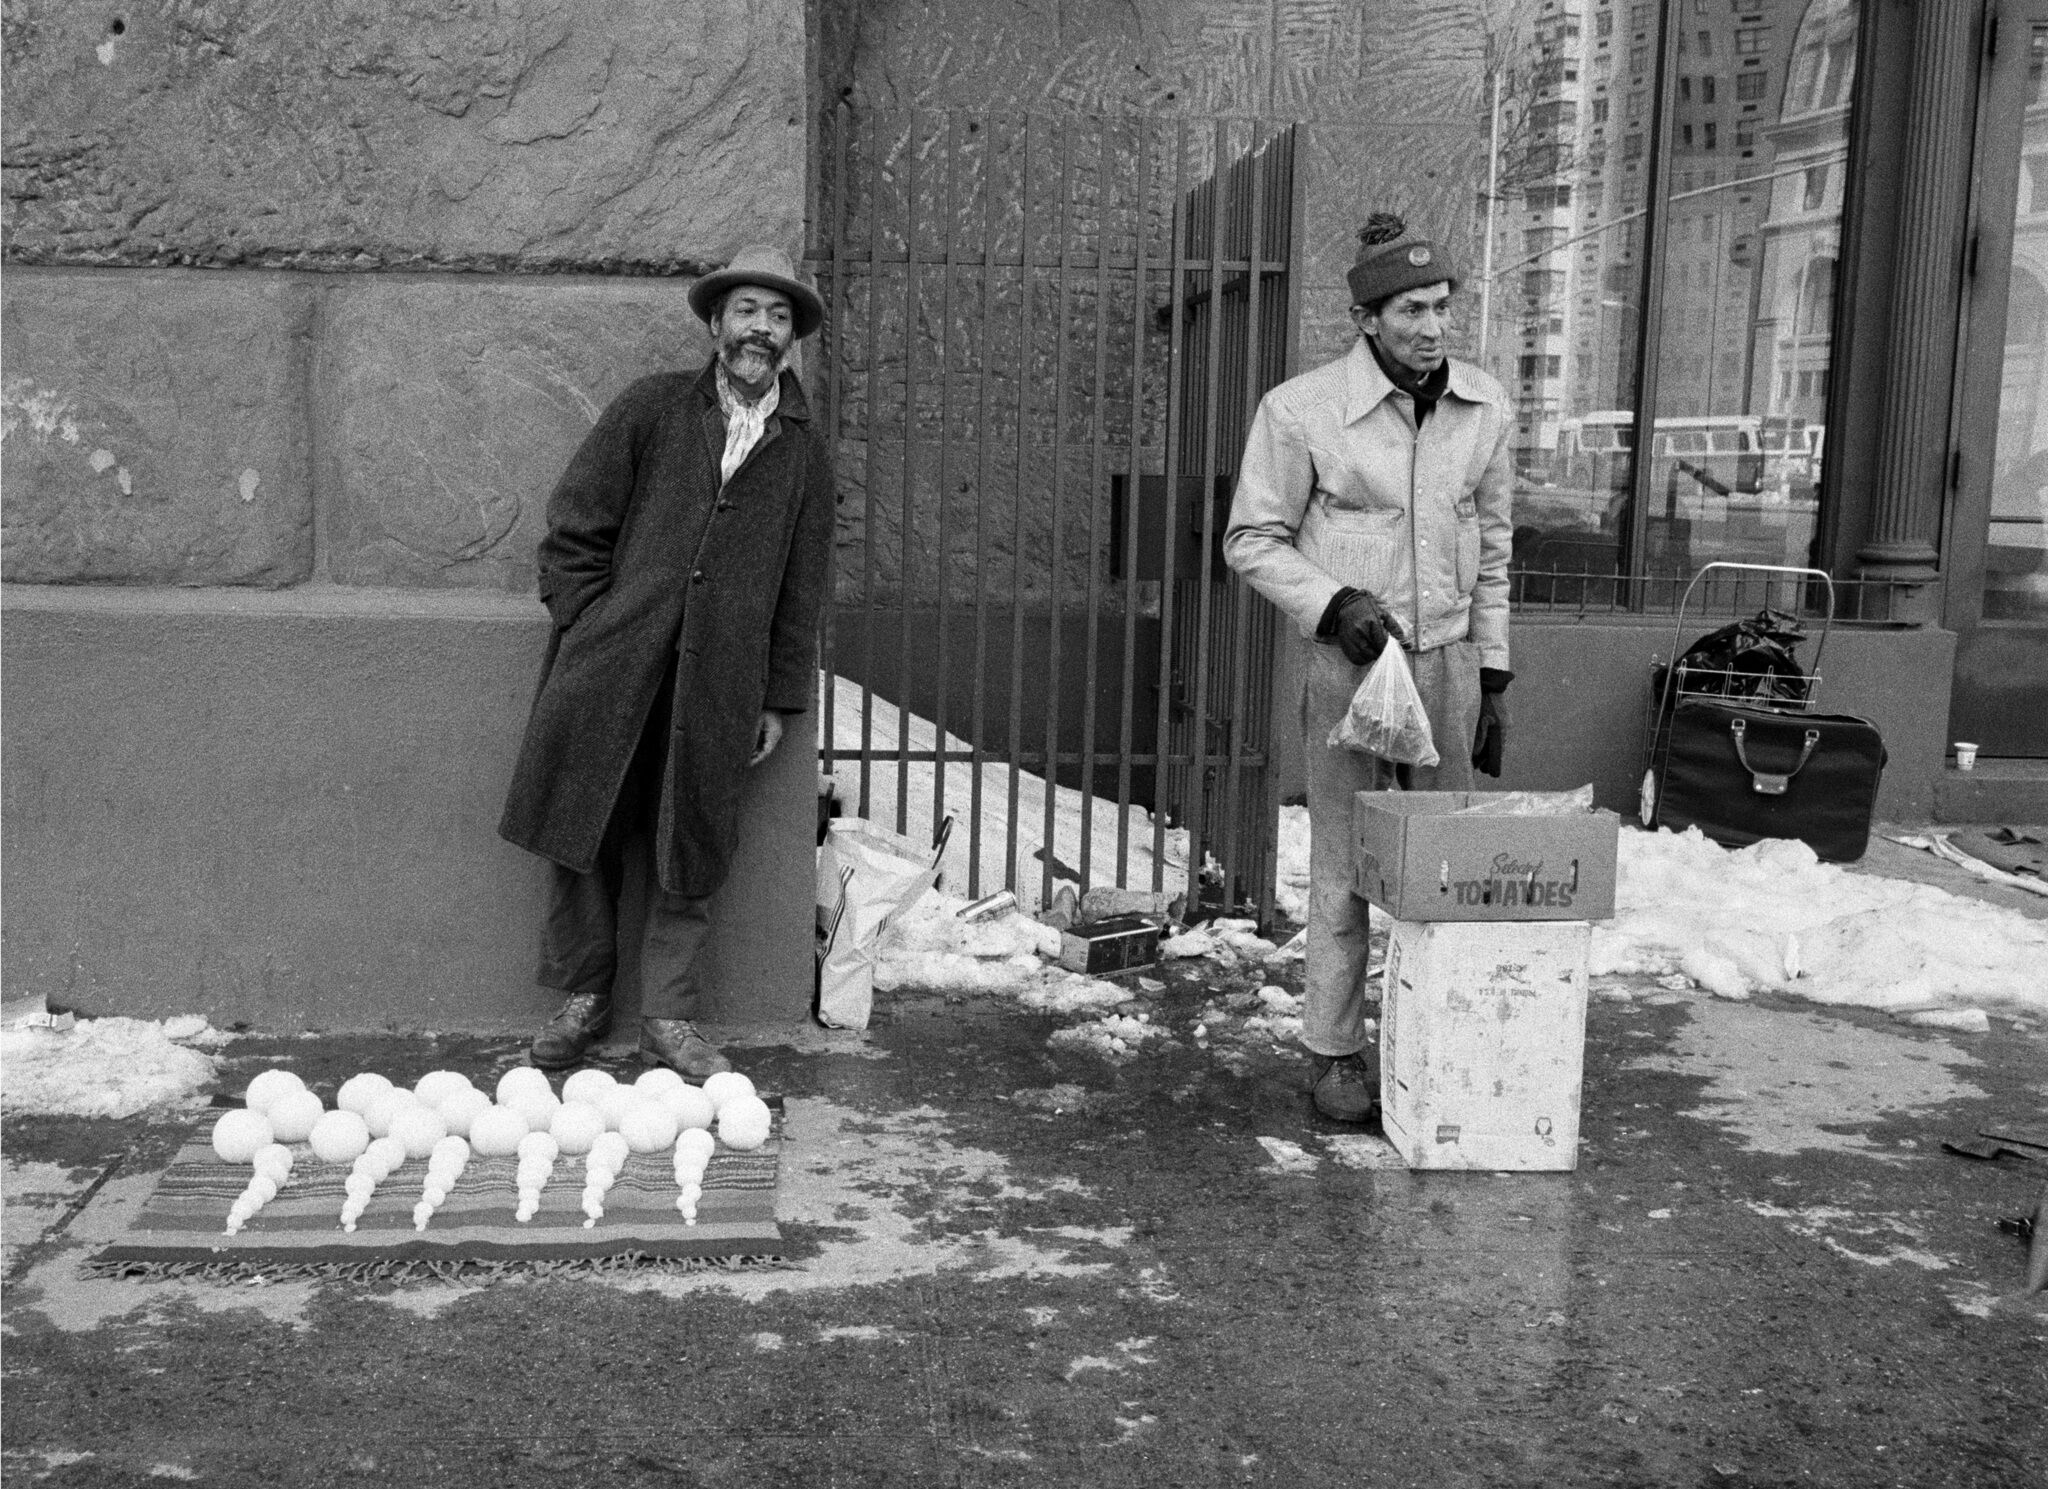 Two men standing on the street. The man on the left leans against the wall while the other stands behind a short pile of boxes.